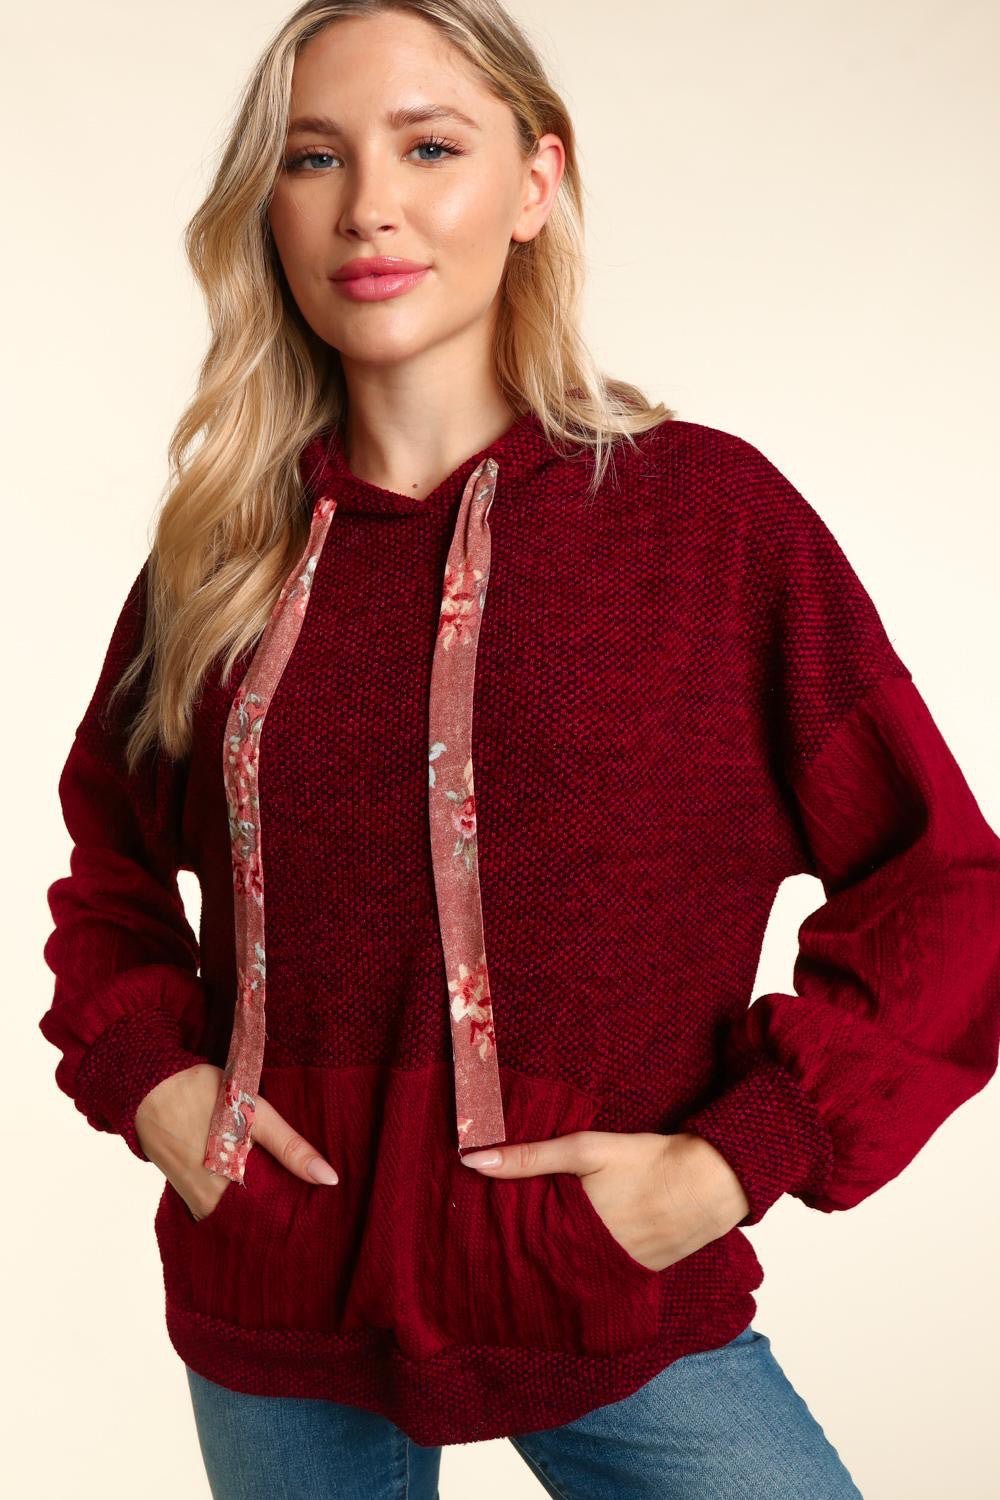 Rosie Jacquard Hacci Hooded Sweater-Sweaters/Sweatshirts-Inspired by Justeen-Women's Clothing Boutique in Chicago, Illinois